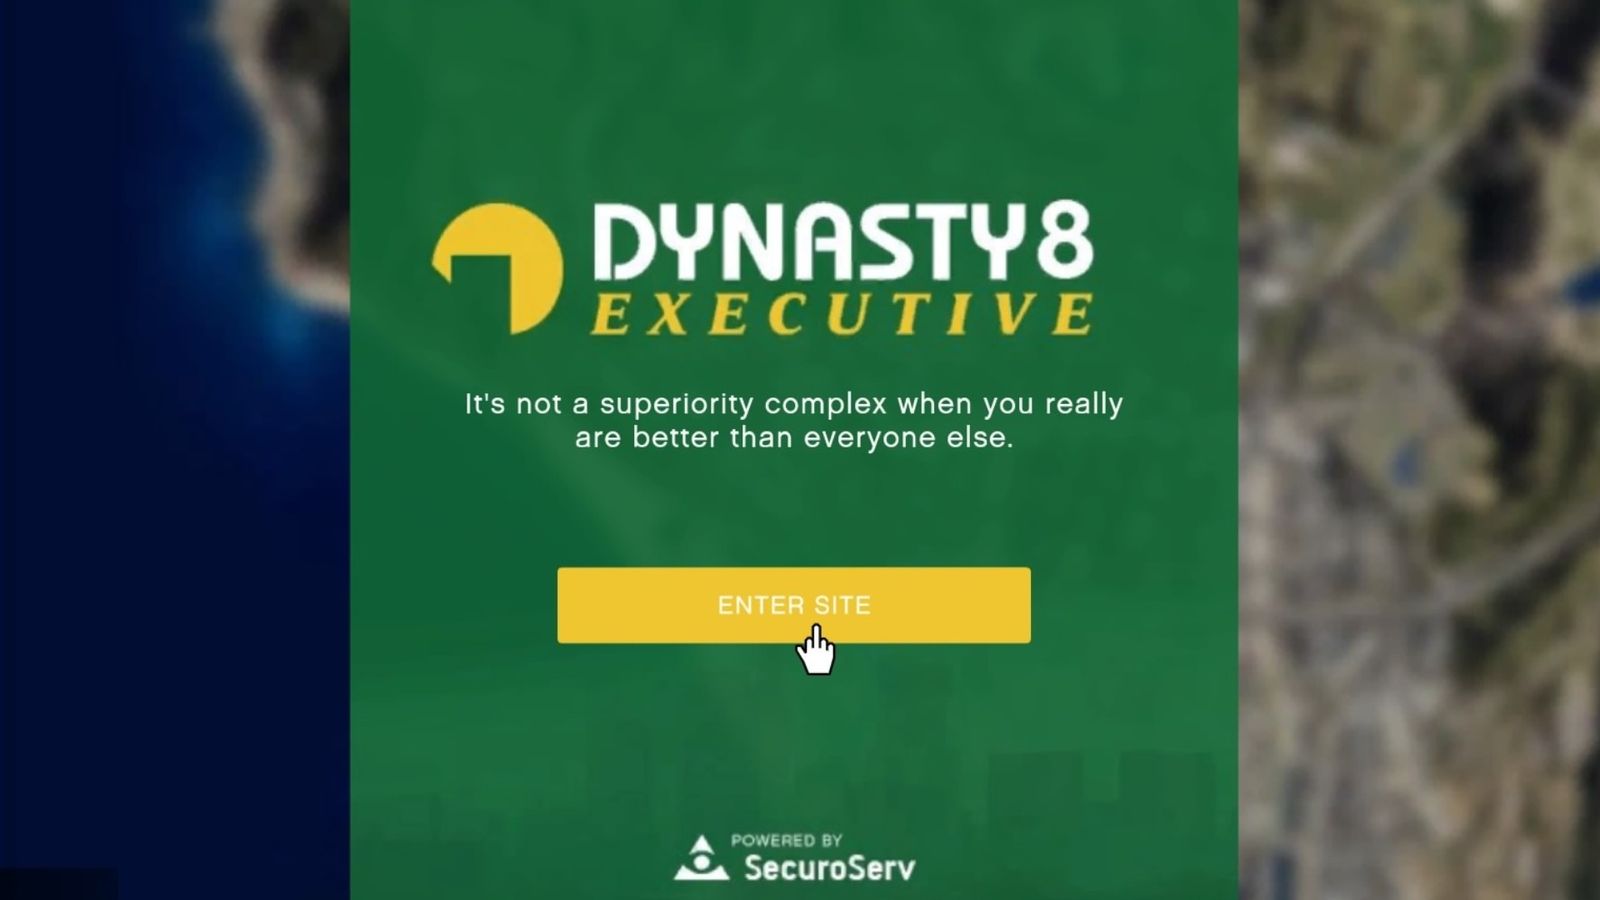 GTA Online Dynasty8 Executive Real Estate Webpage entry screen